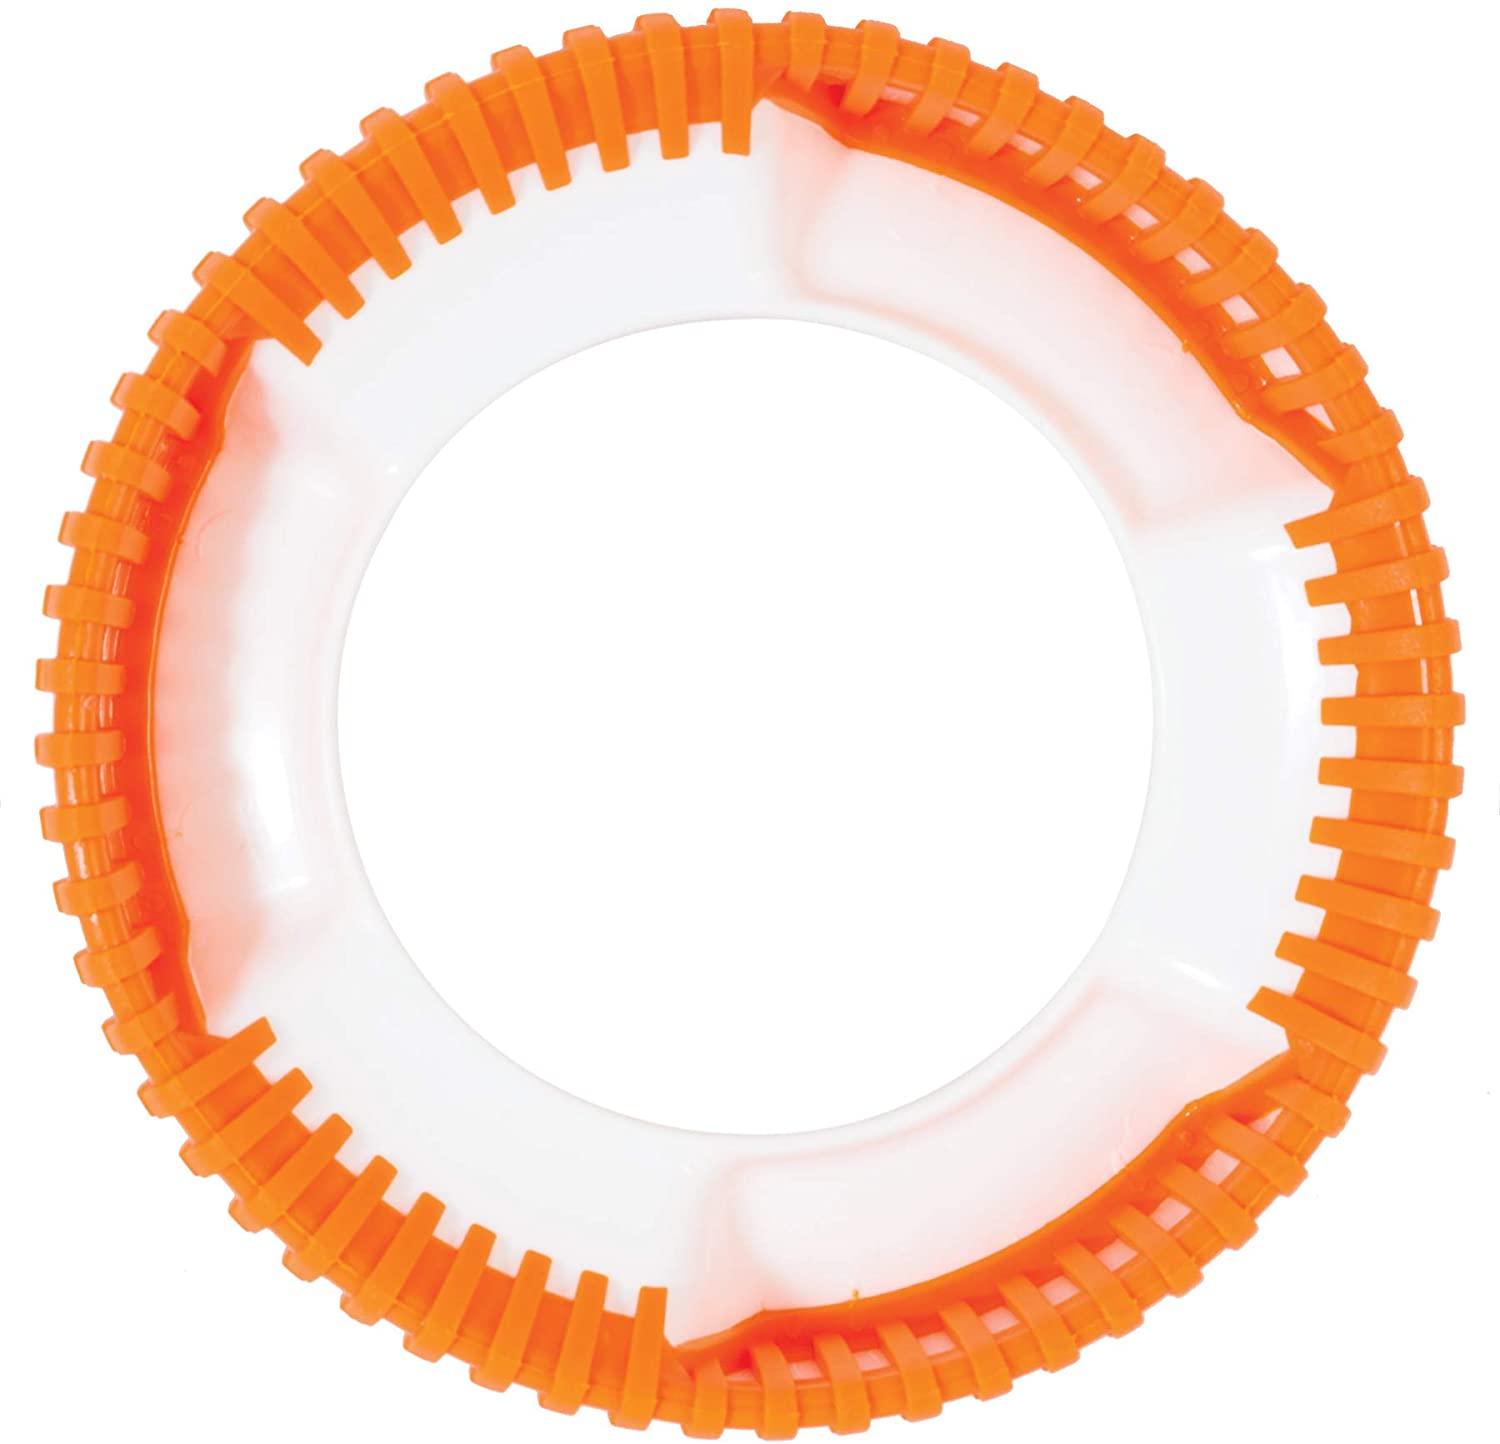 Chuckit! Rugged Fetch Wheel - Pet's Play Toy Store